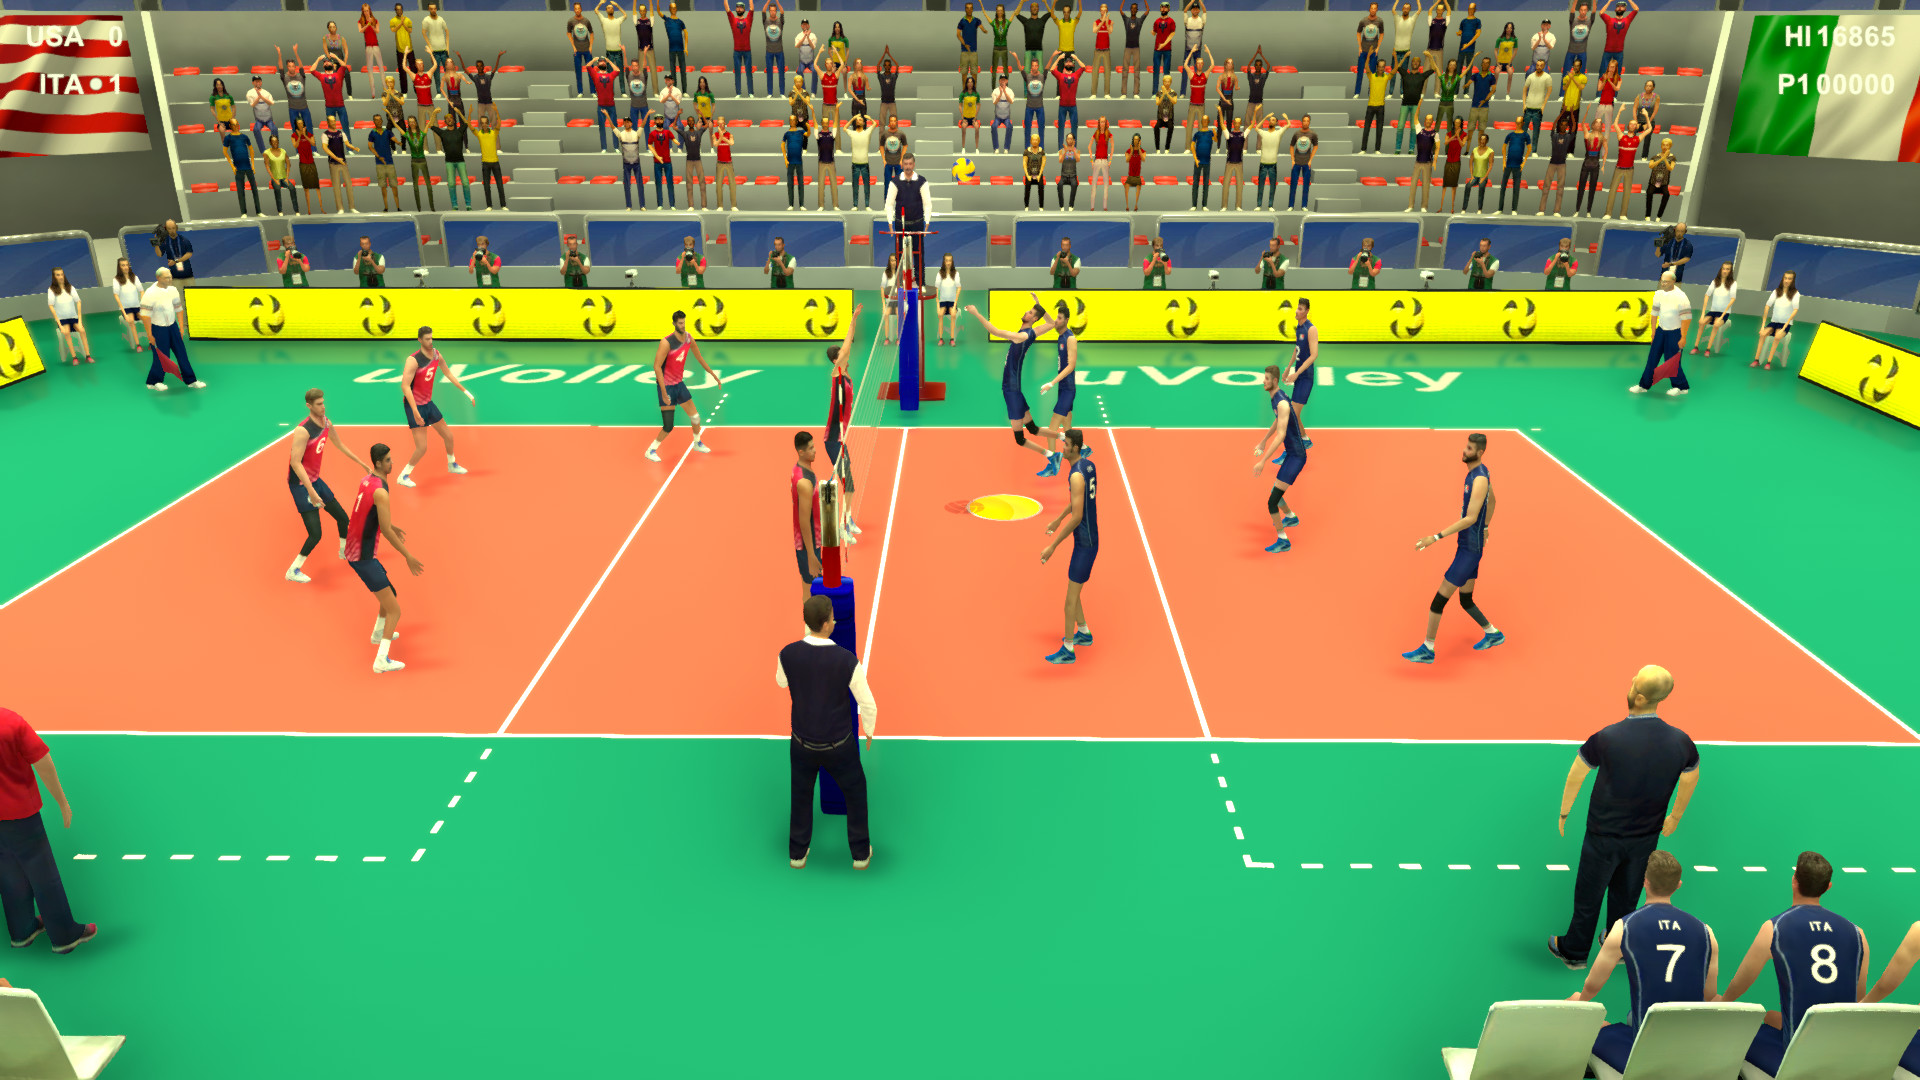 uVolley on Steam